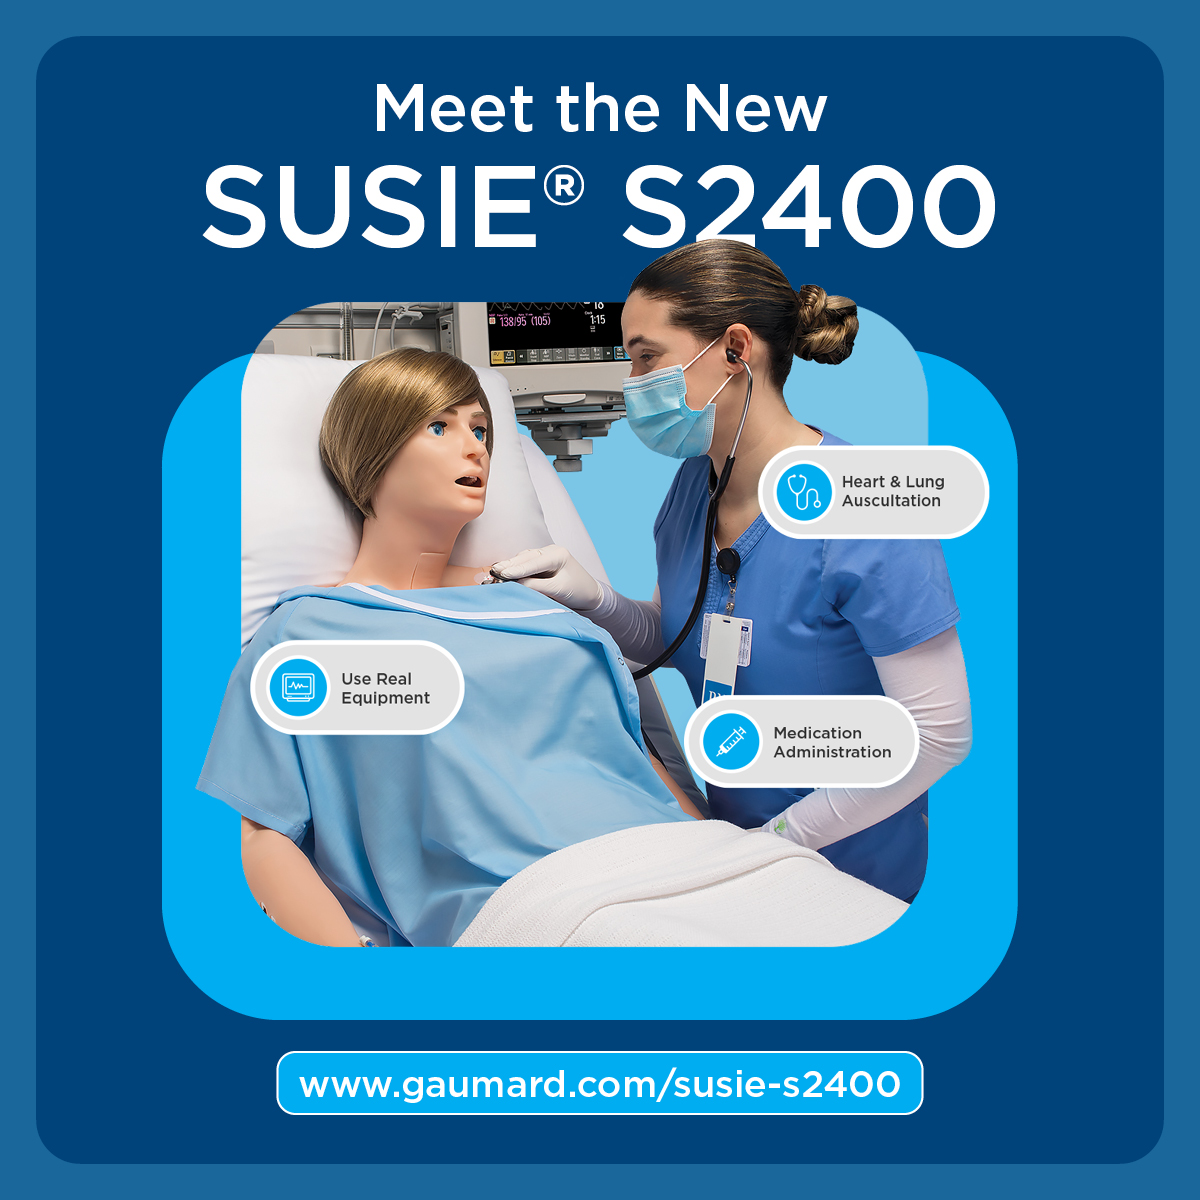 #DYK The SUSIE S2400 simulates central venous catheter care, aiding in dressing, flushing, and medication administration. Its reusable design reduces training costs while offering hands-on clinical skill development, boosting confidence and proficiency for comprehensive training.